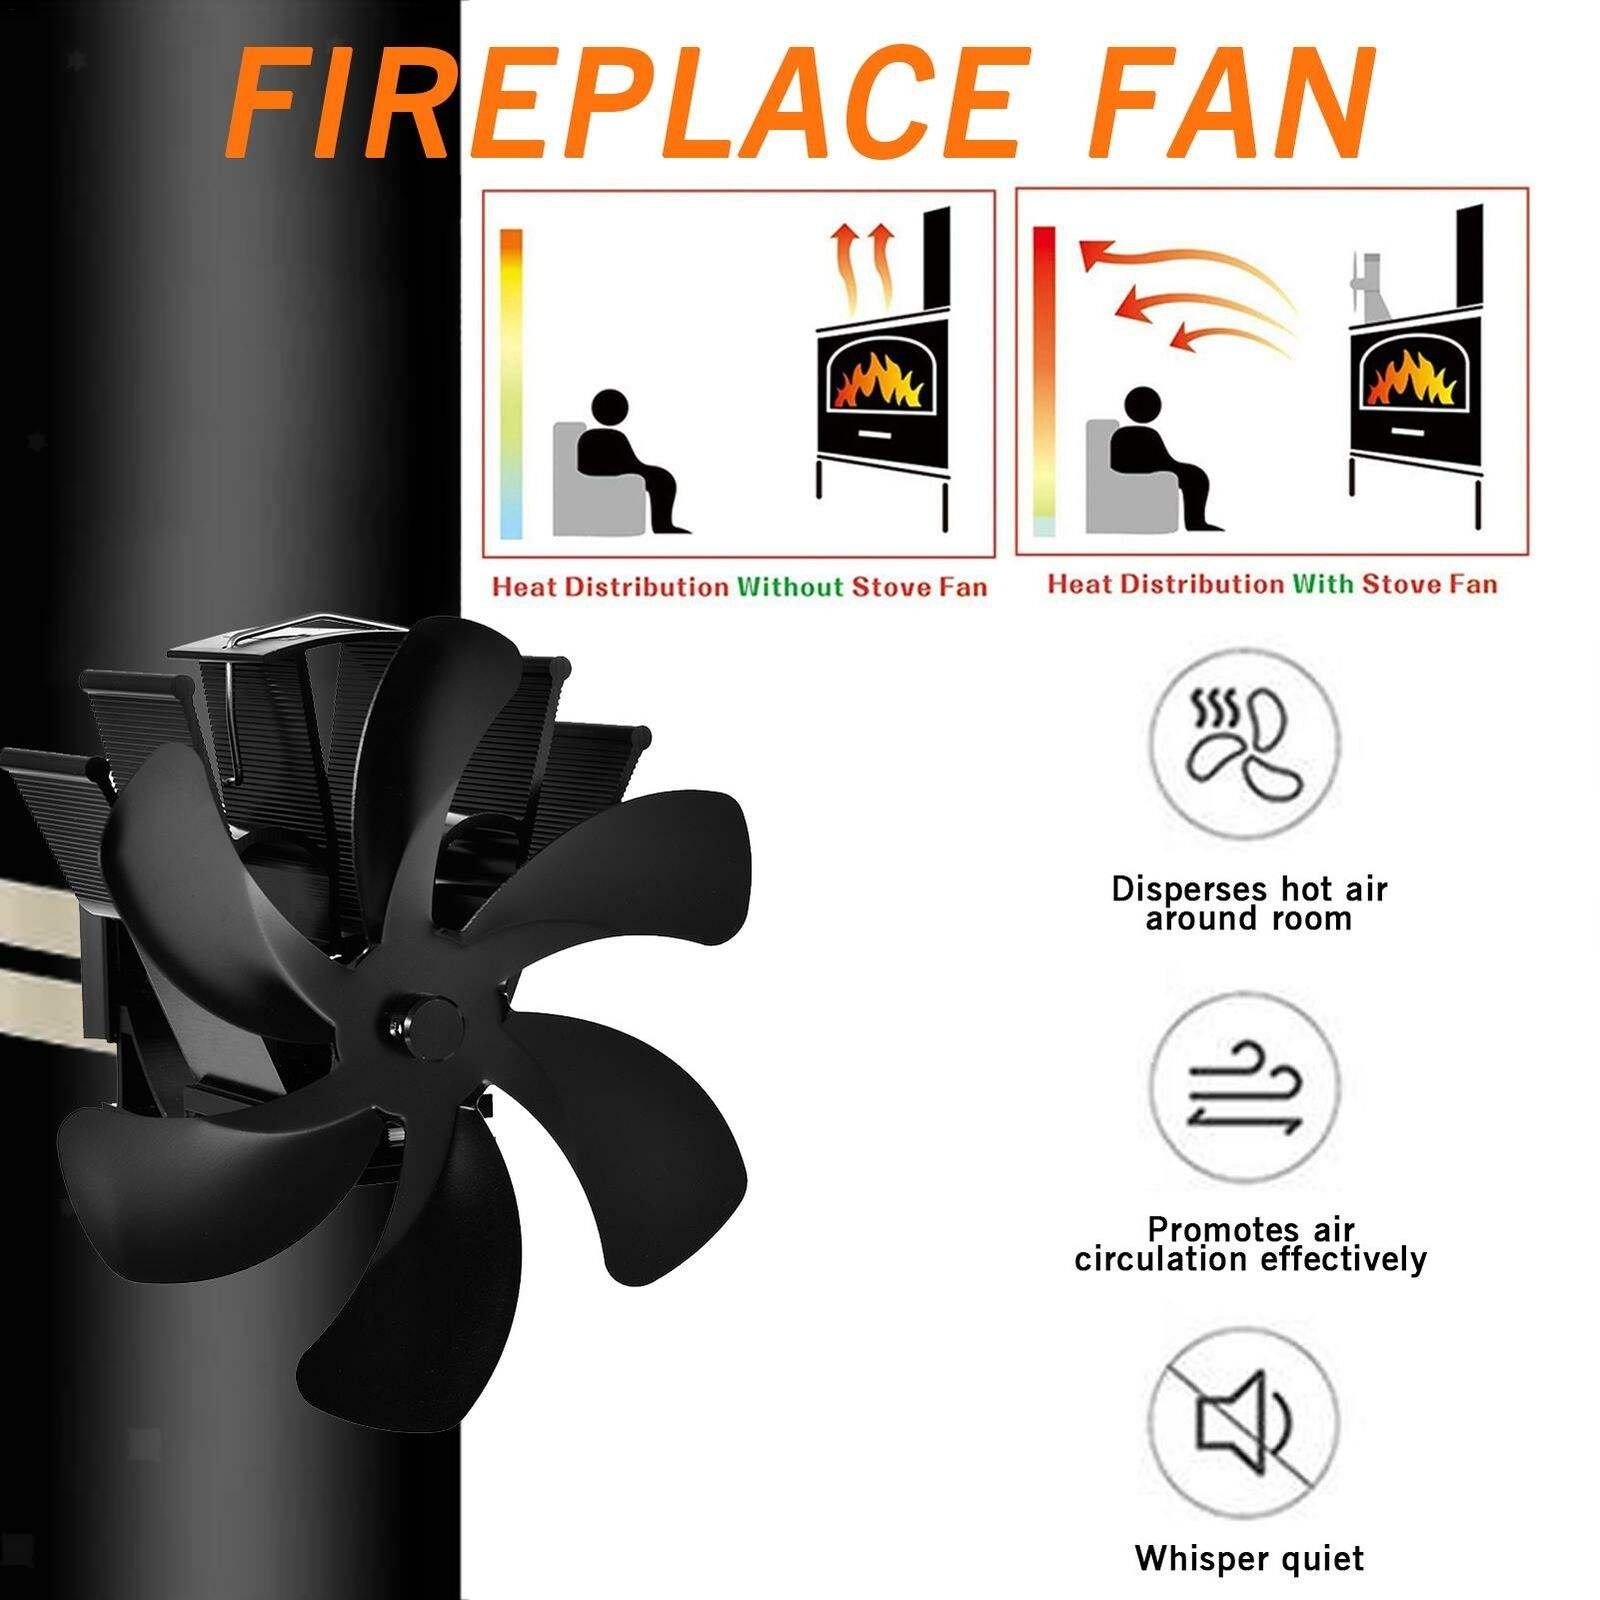 Fireplace Fan Heat Powered Stove Fans for Wood/Log Burner/Fireplace 6 Blades